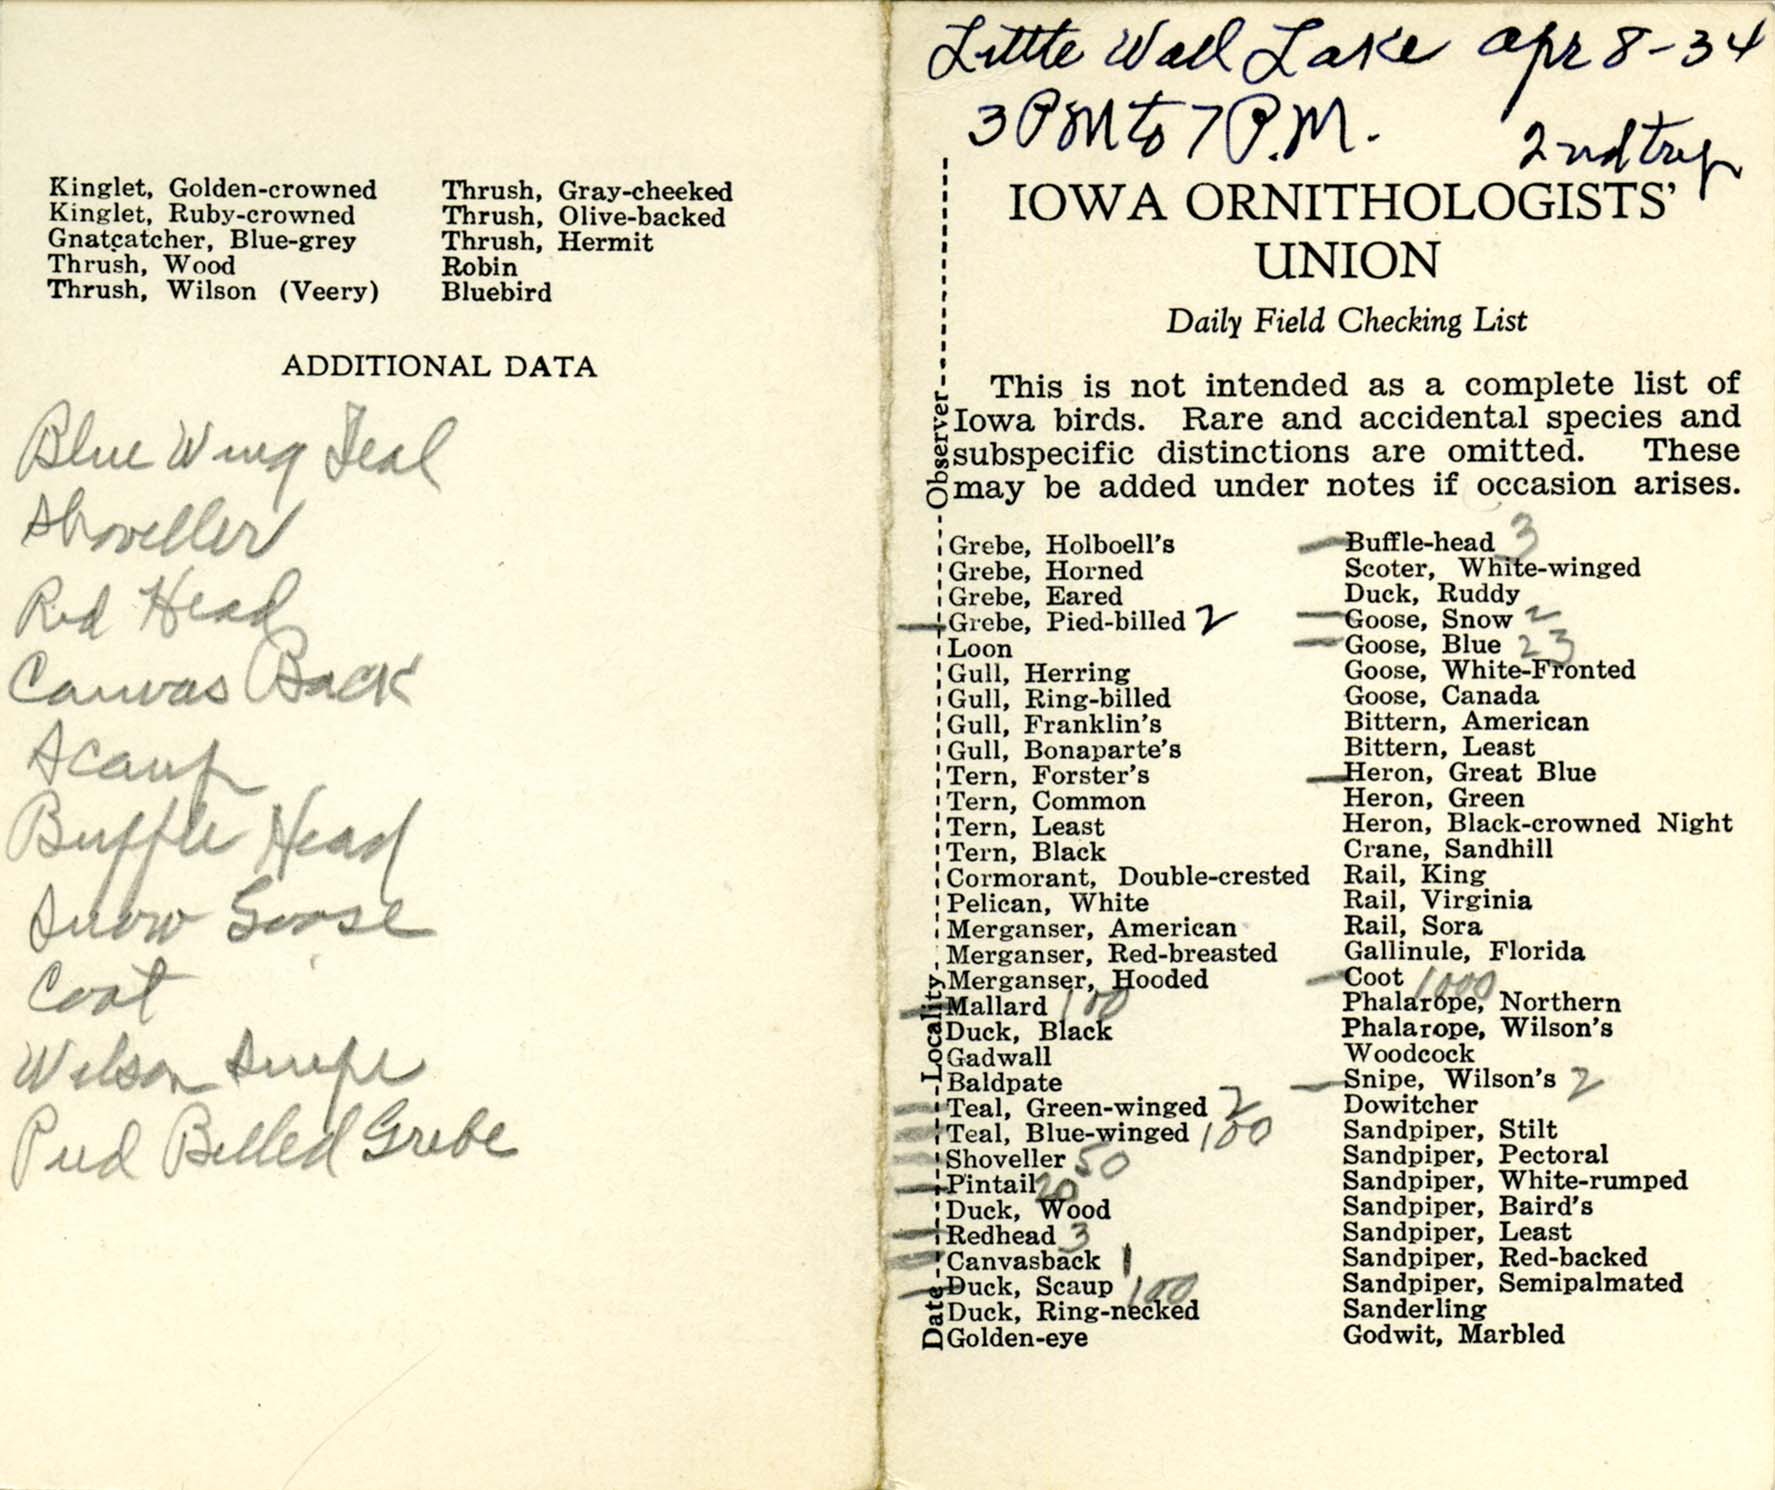 Daily field checking list, Walter Rosene, April 8, 1934 second trip